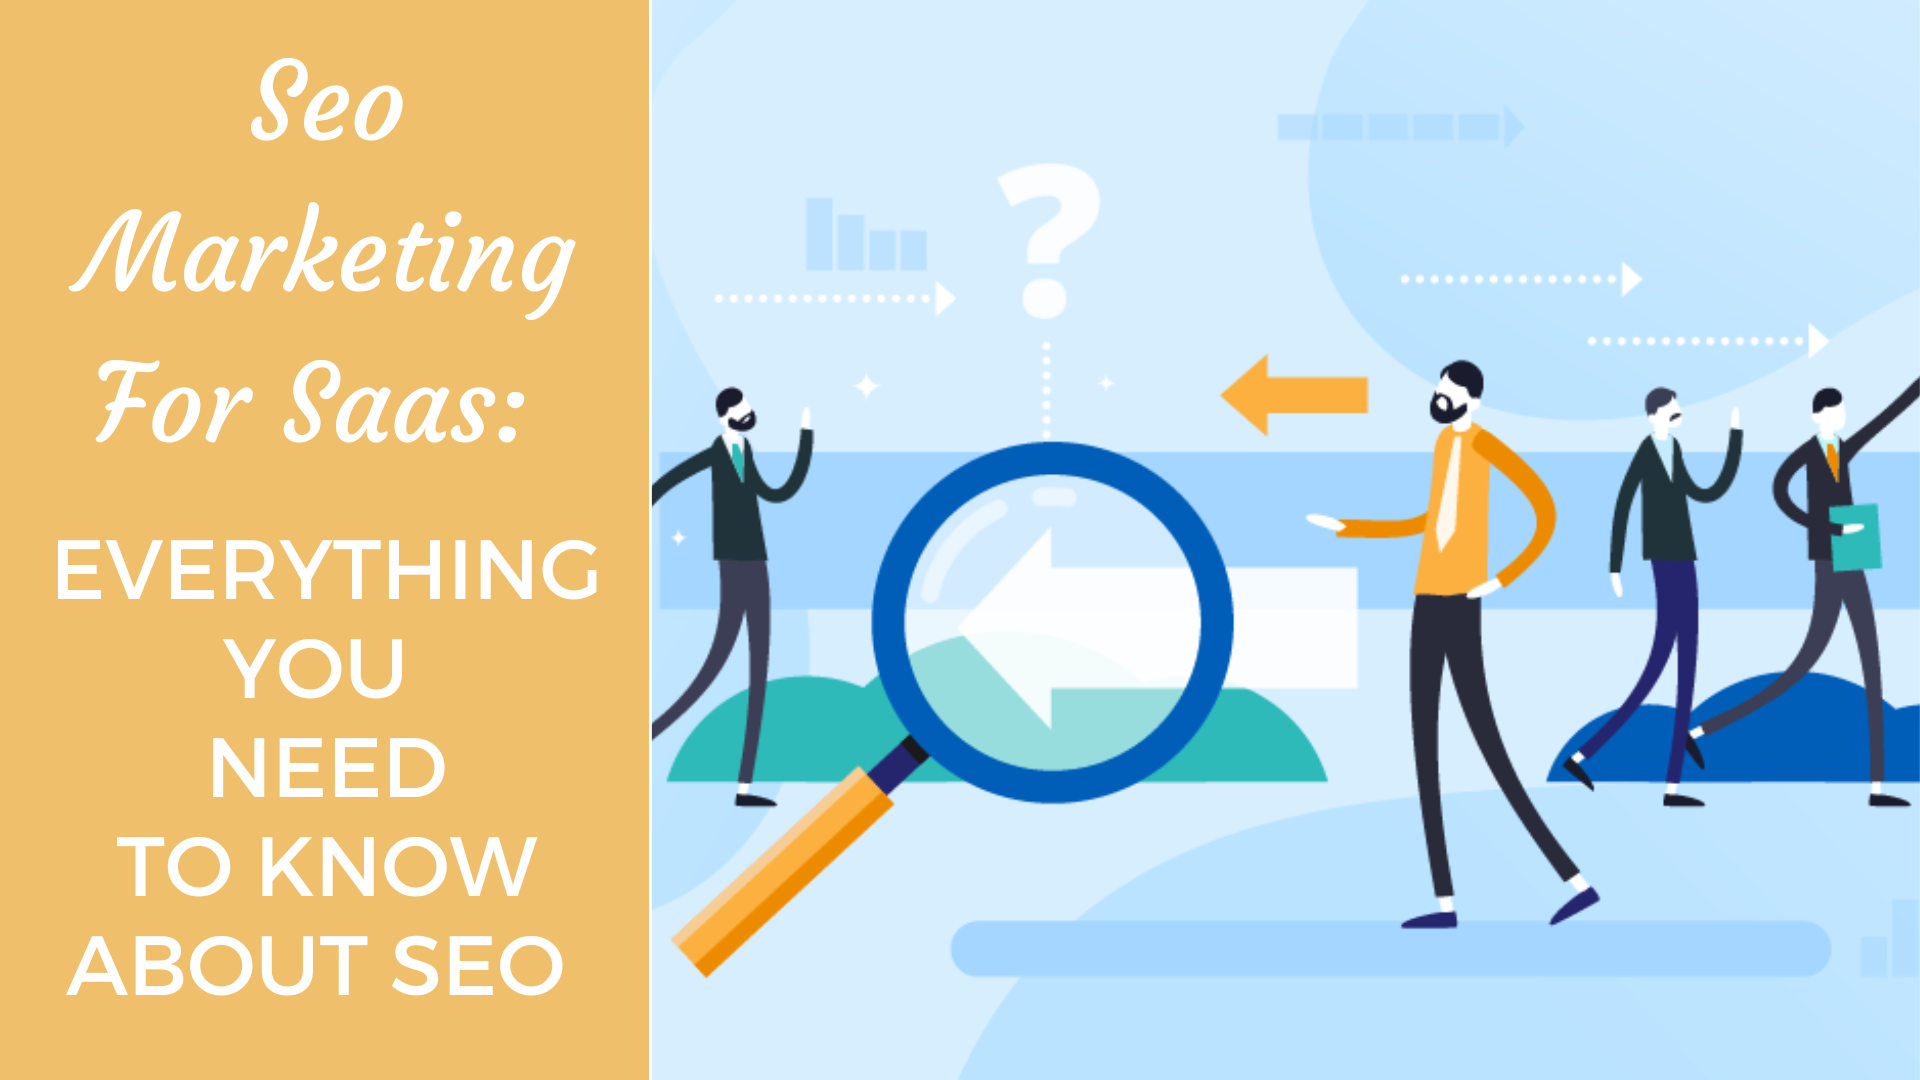 You are currently viewing Seo Marketing For Saas: Everything You Need To Know About SEO